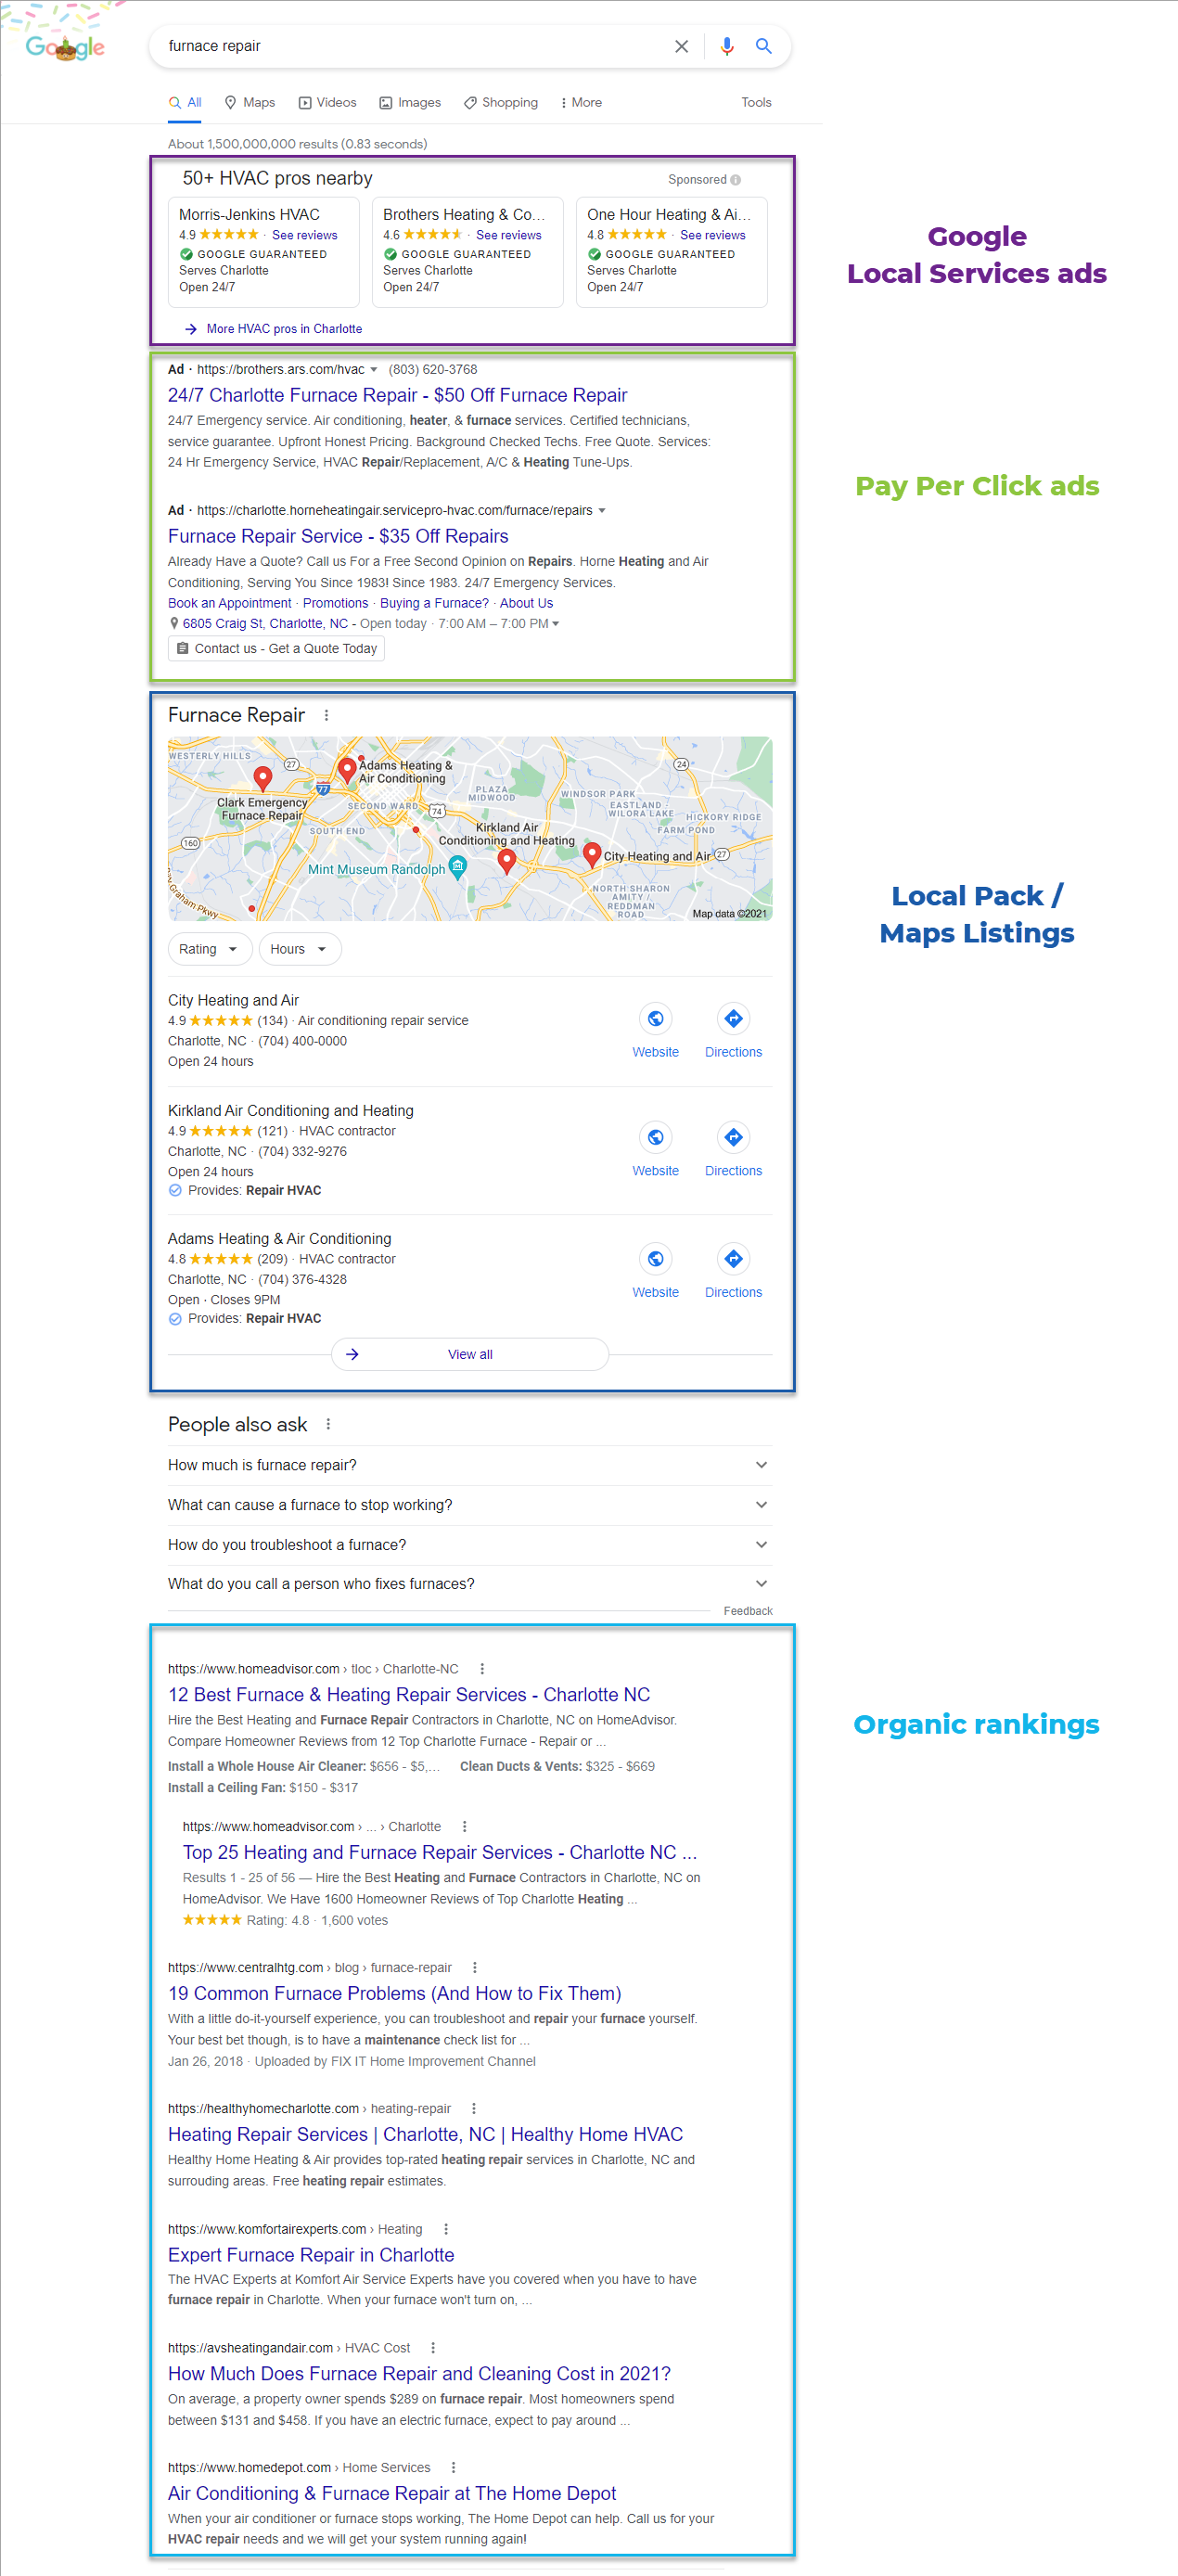 anatomy of a Google search results page